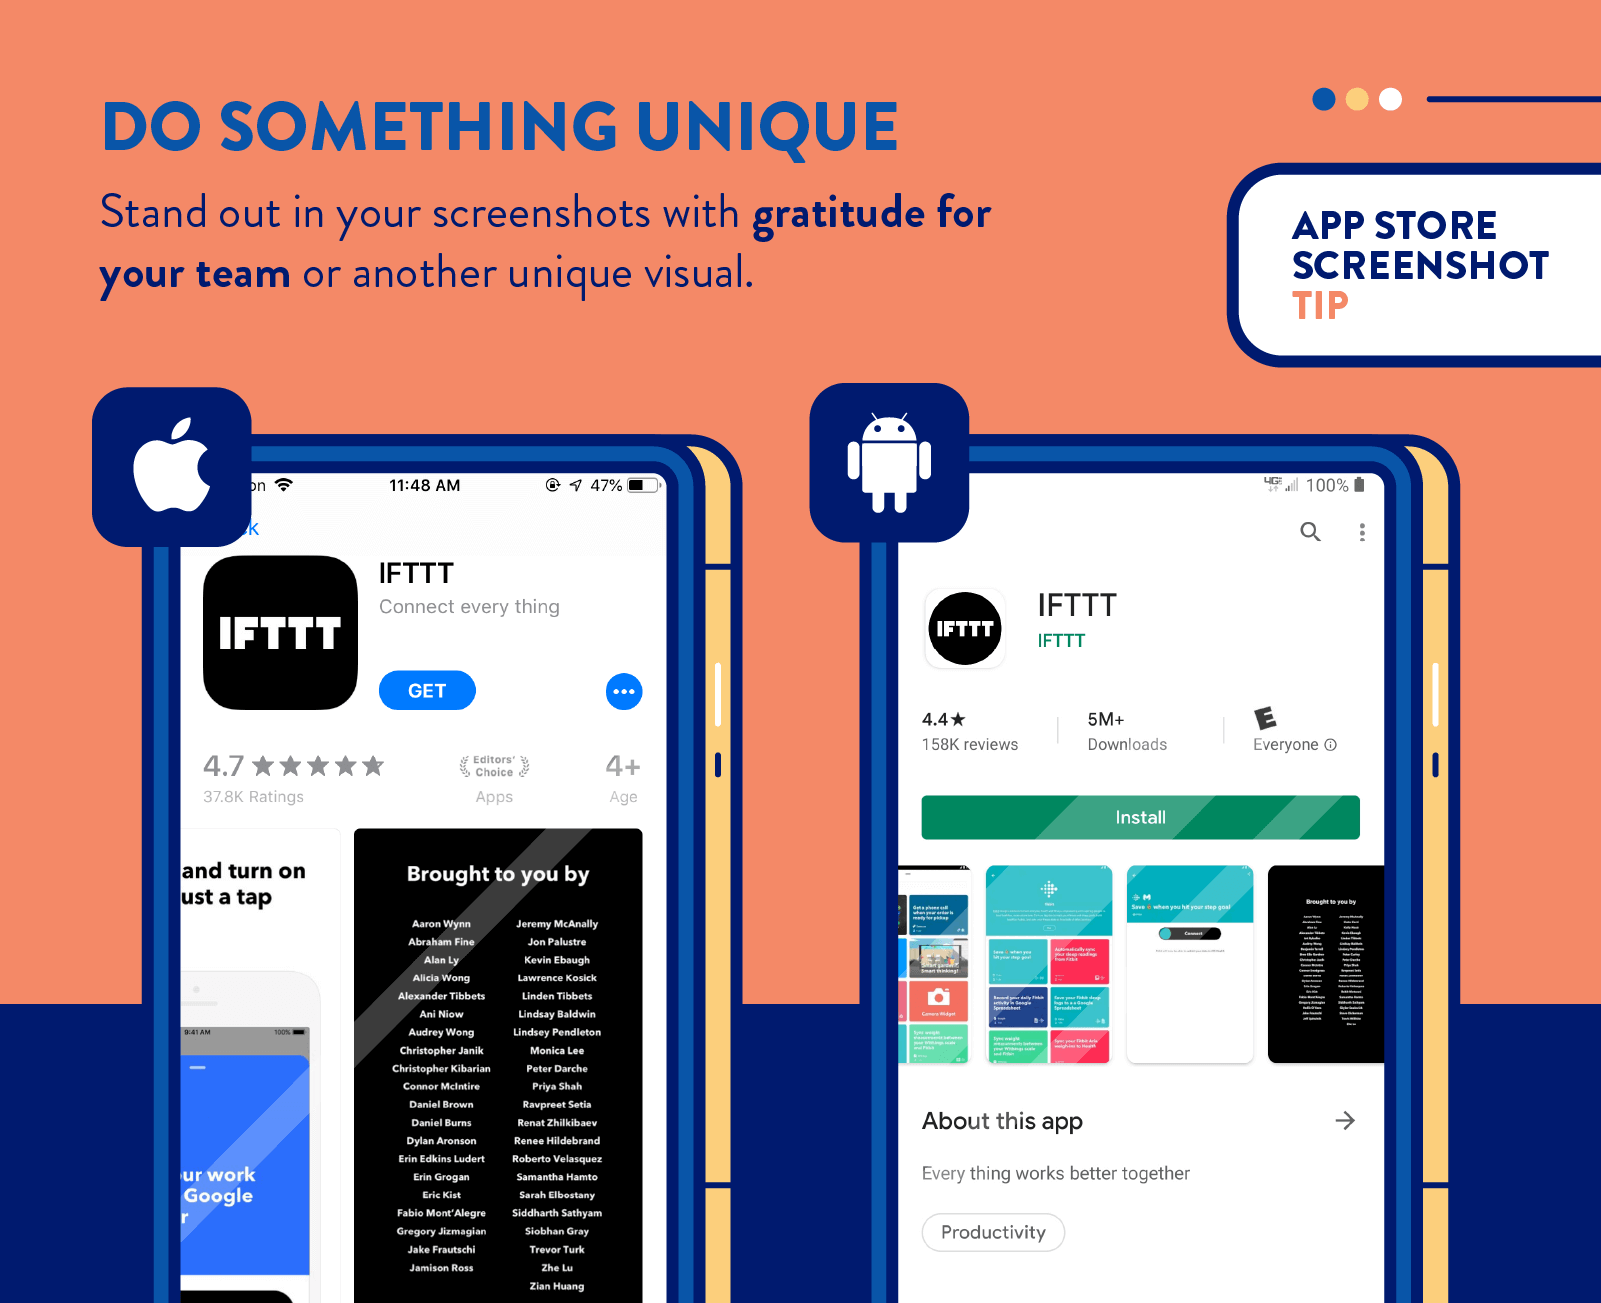 app store screenshots tip from IFTTT to do something unique